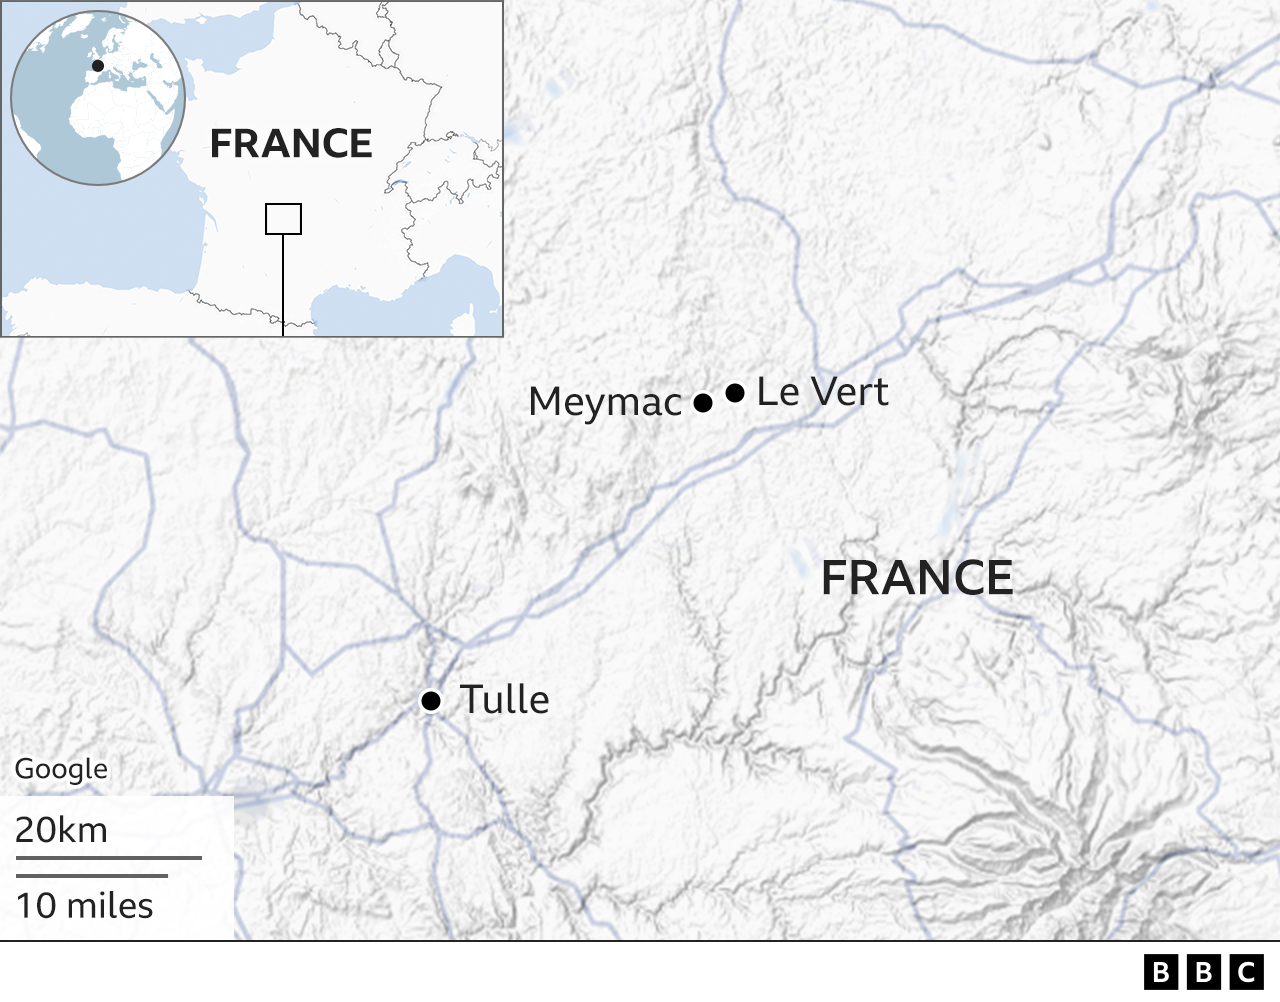 Map showing area of central France and locations of Tulle, Meymac and Le Vert